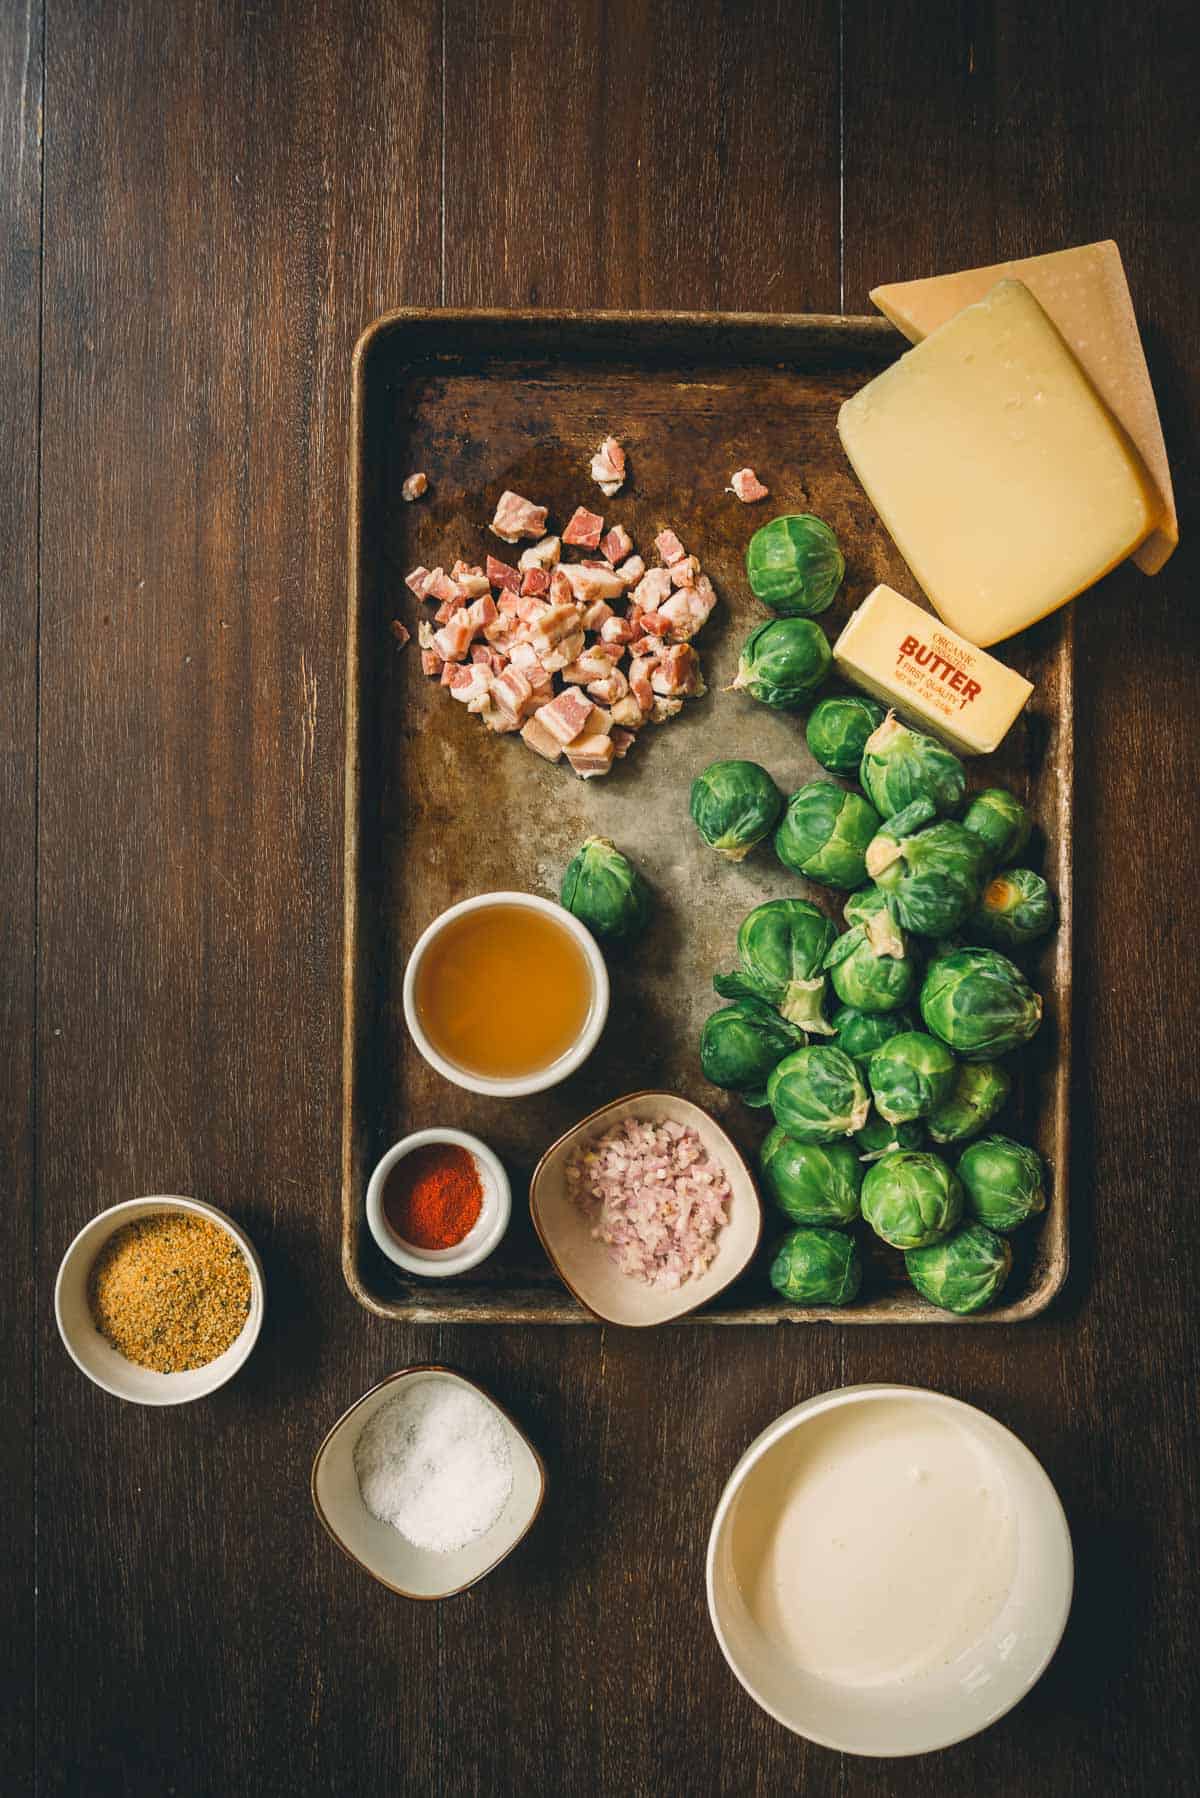 Ingredients for brussels sprouts on a tray.